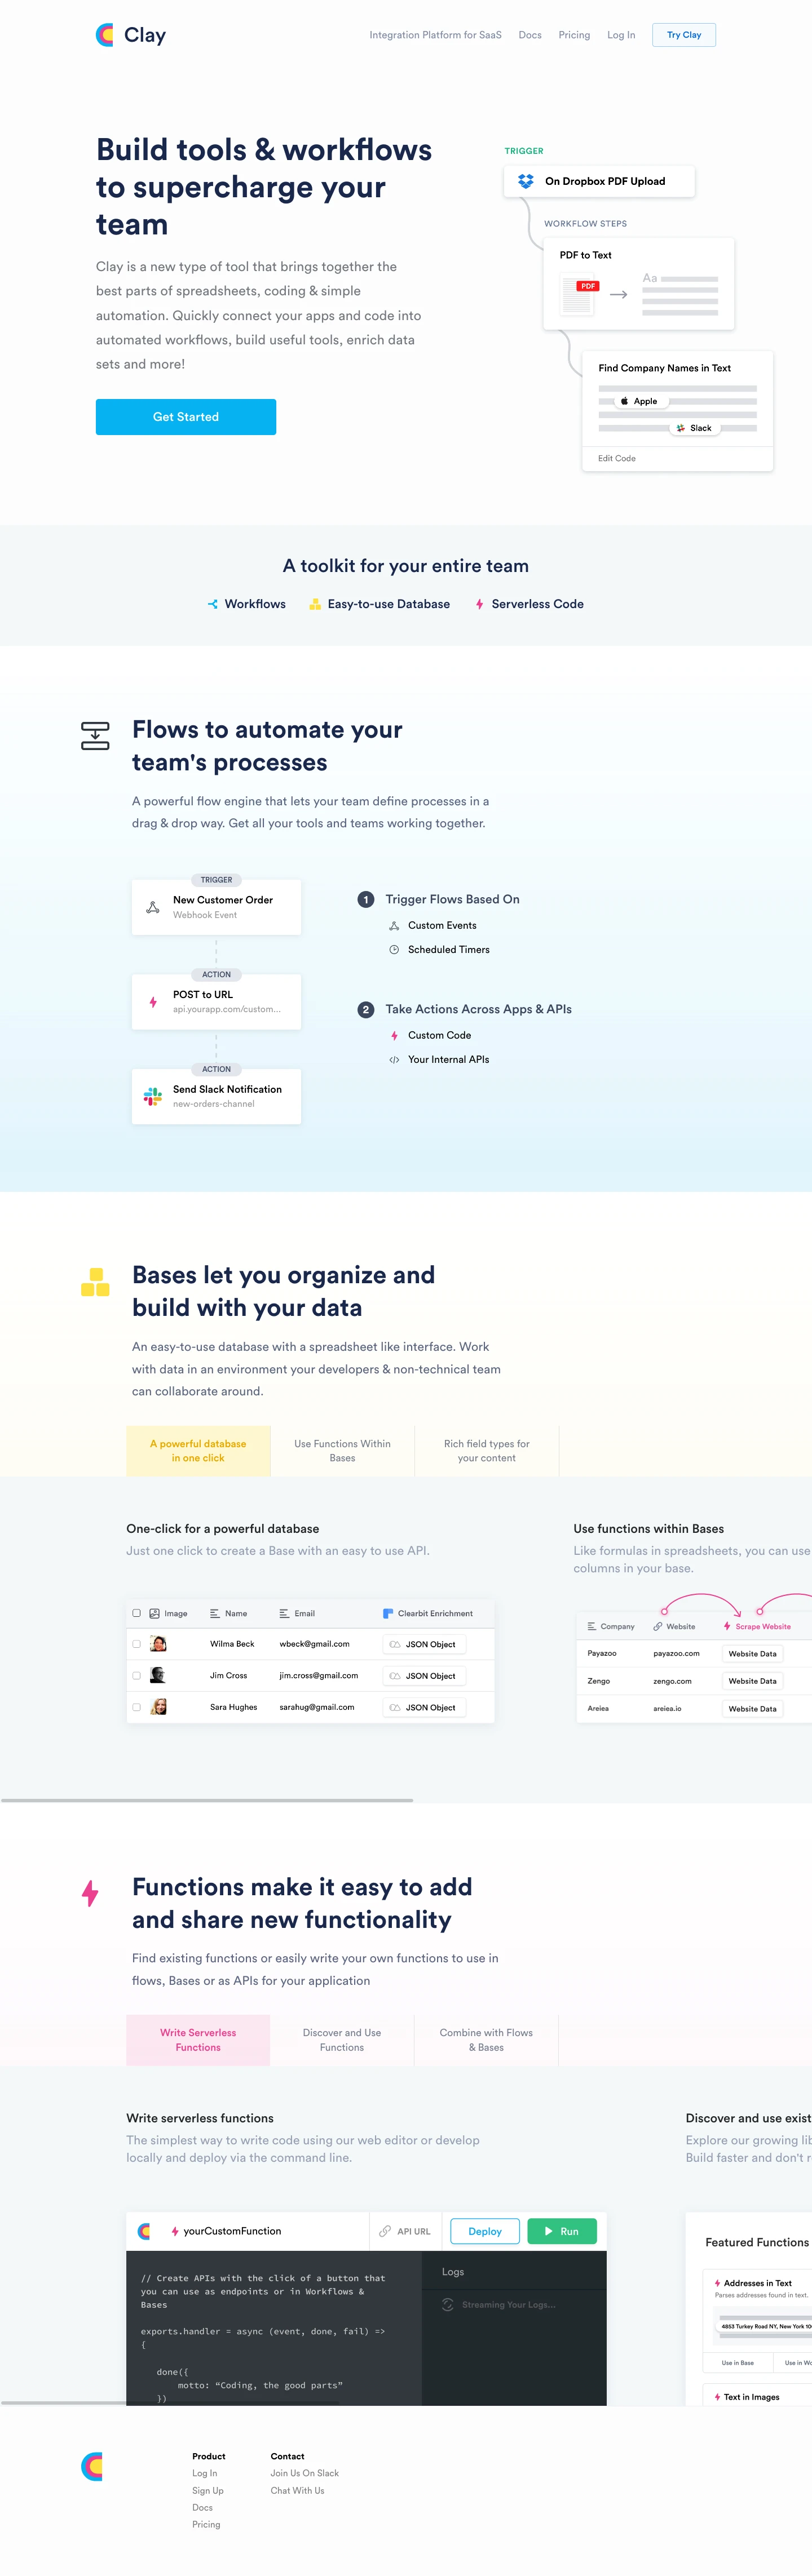 Clay Landing Page Example: Clay is a new type of tool that brings together the best parts of spreadsheets, coding & simple automation. Quickly connect your apps and code into automated workflows, build useful tools, enrich data sets and more!